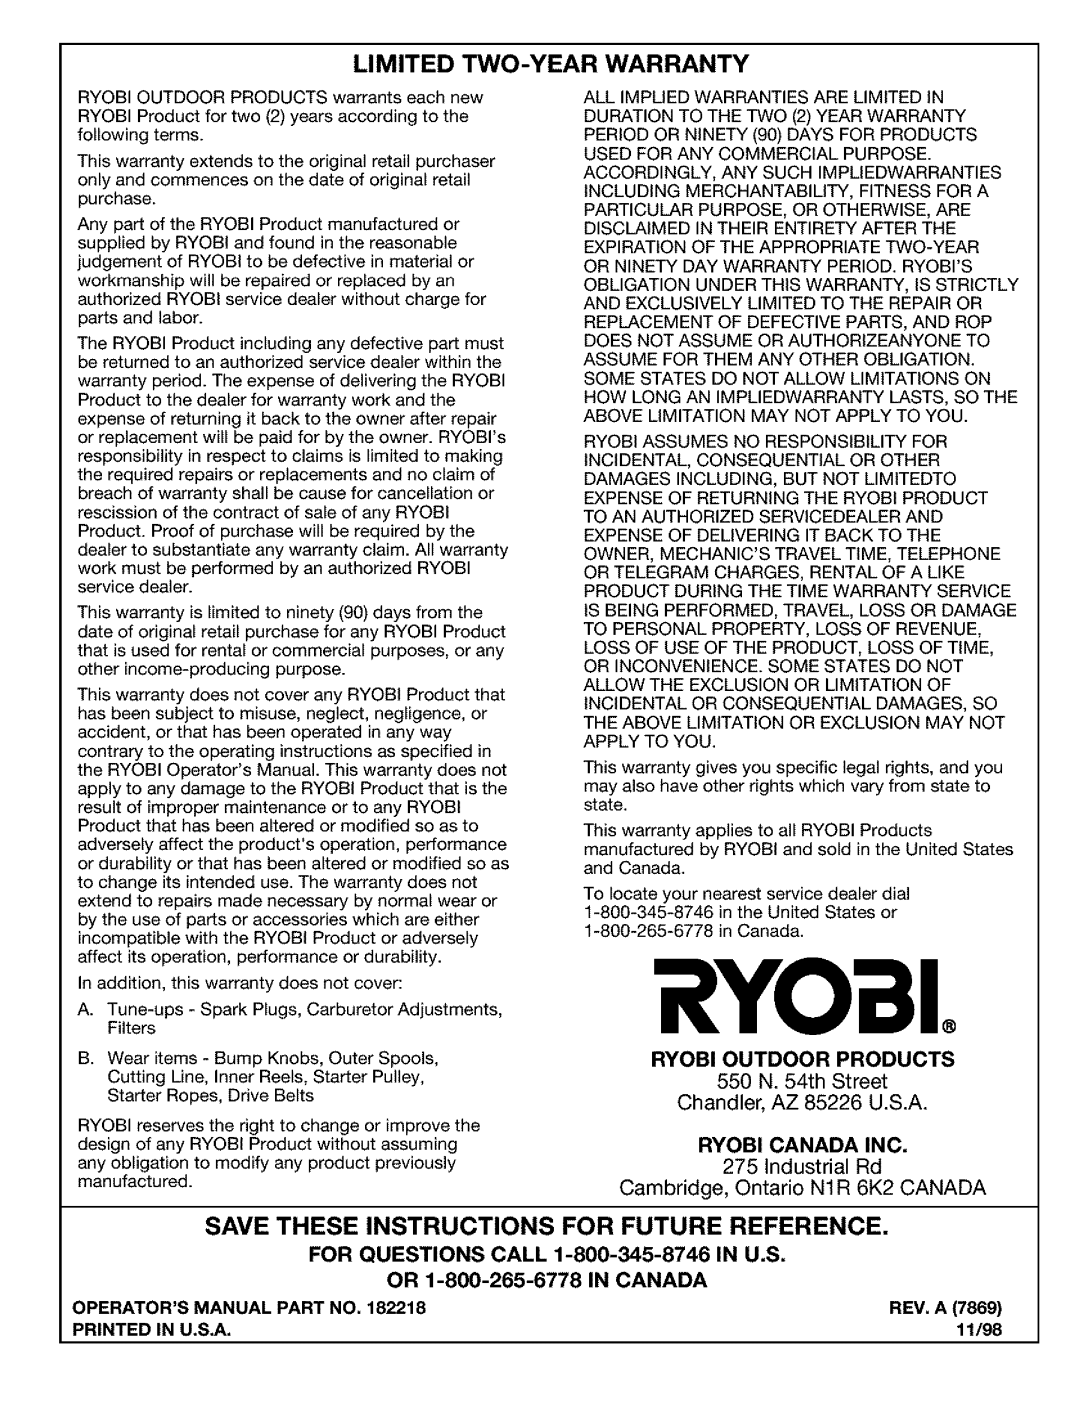 Ryobi Outdoor Trimmer Limited Two-Yearwarranty, Save These Instructions For Future Reference, Ryobi Canada Inc, Rev. A 